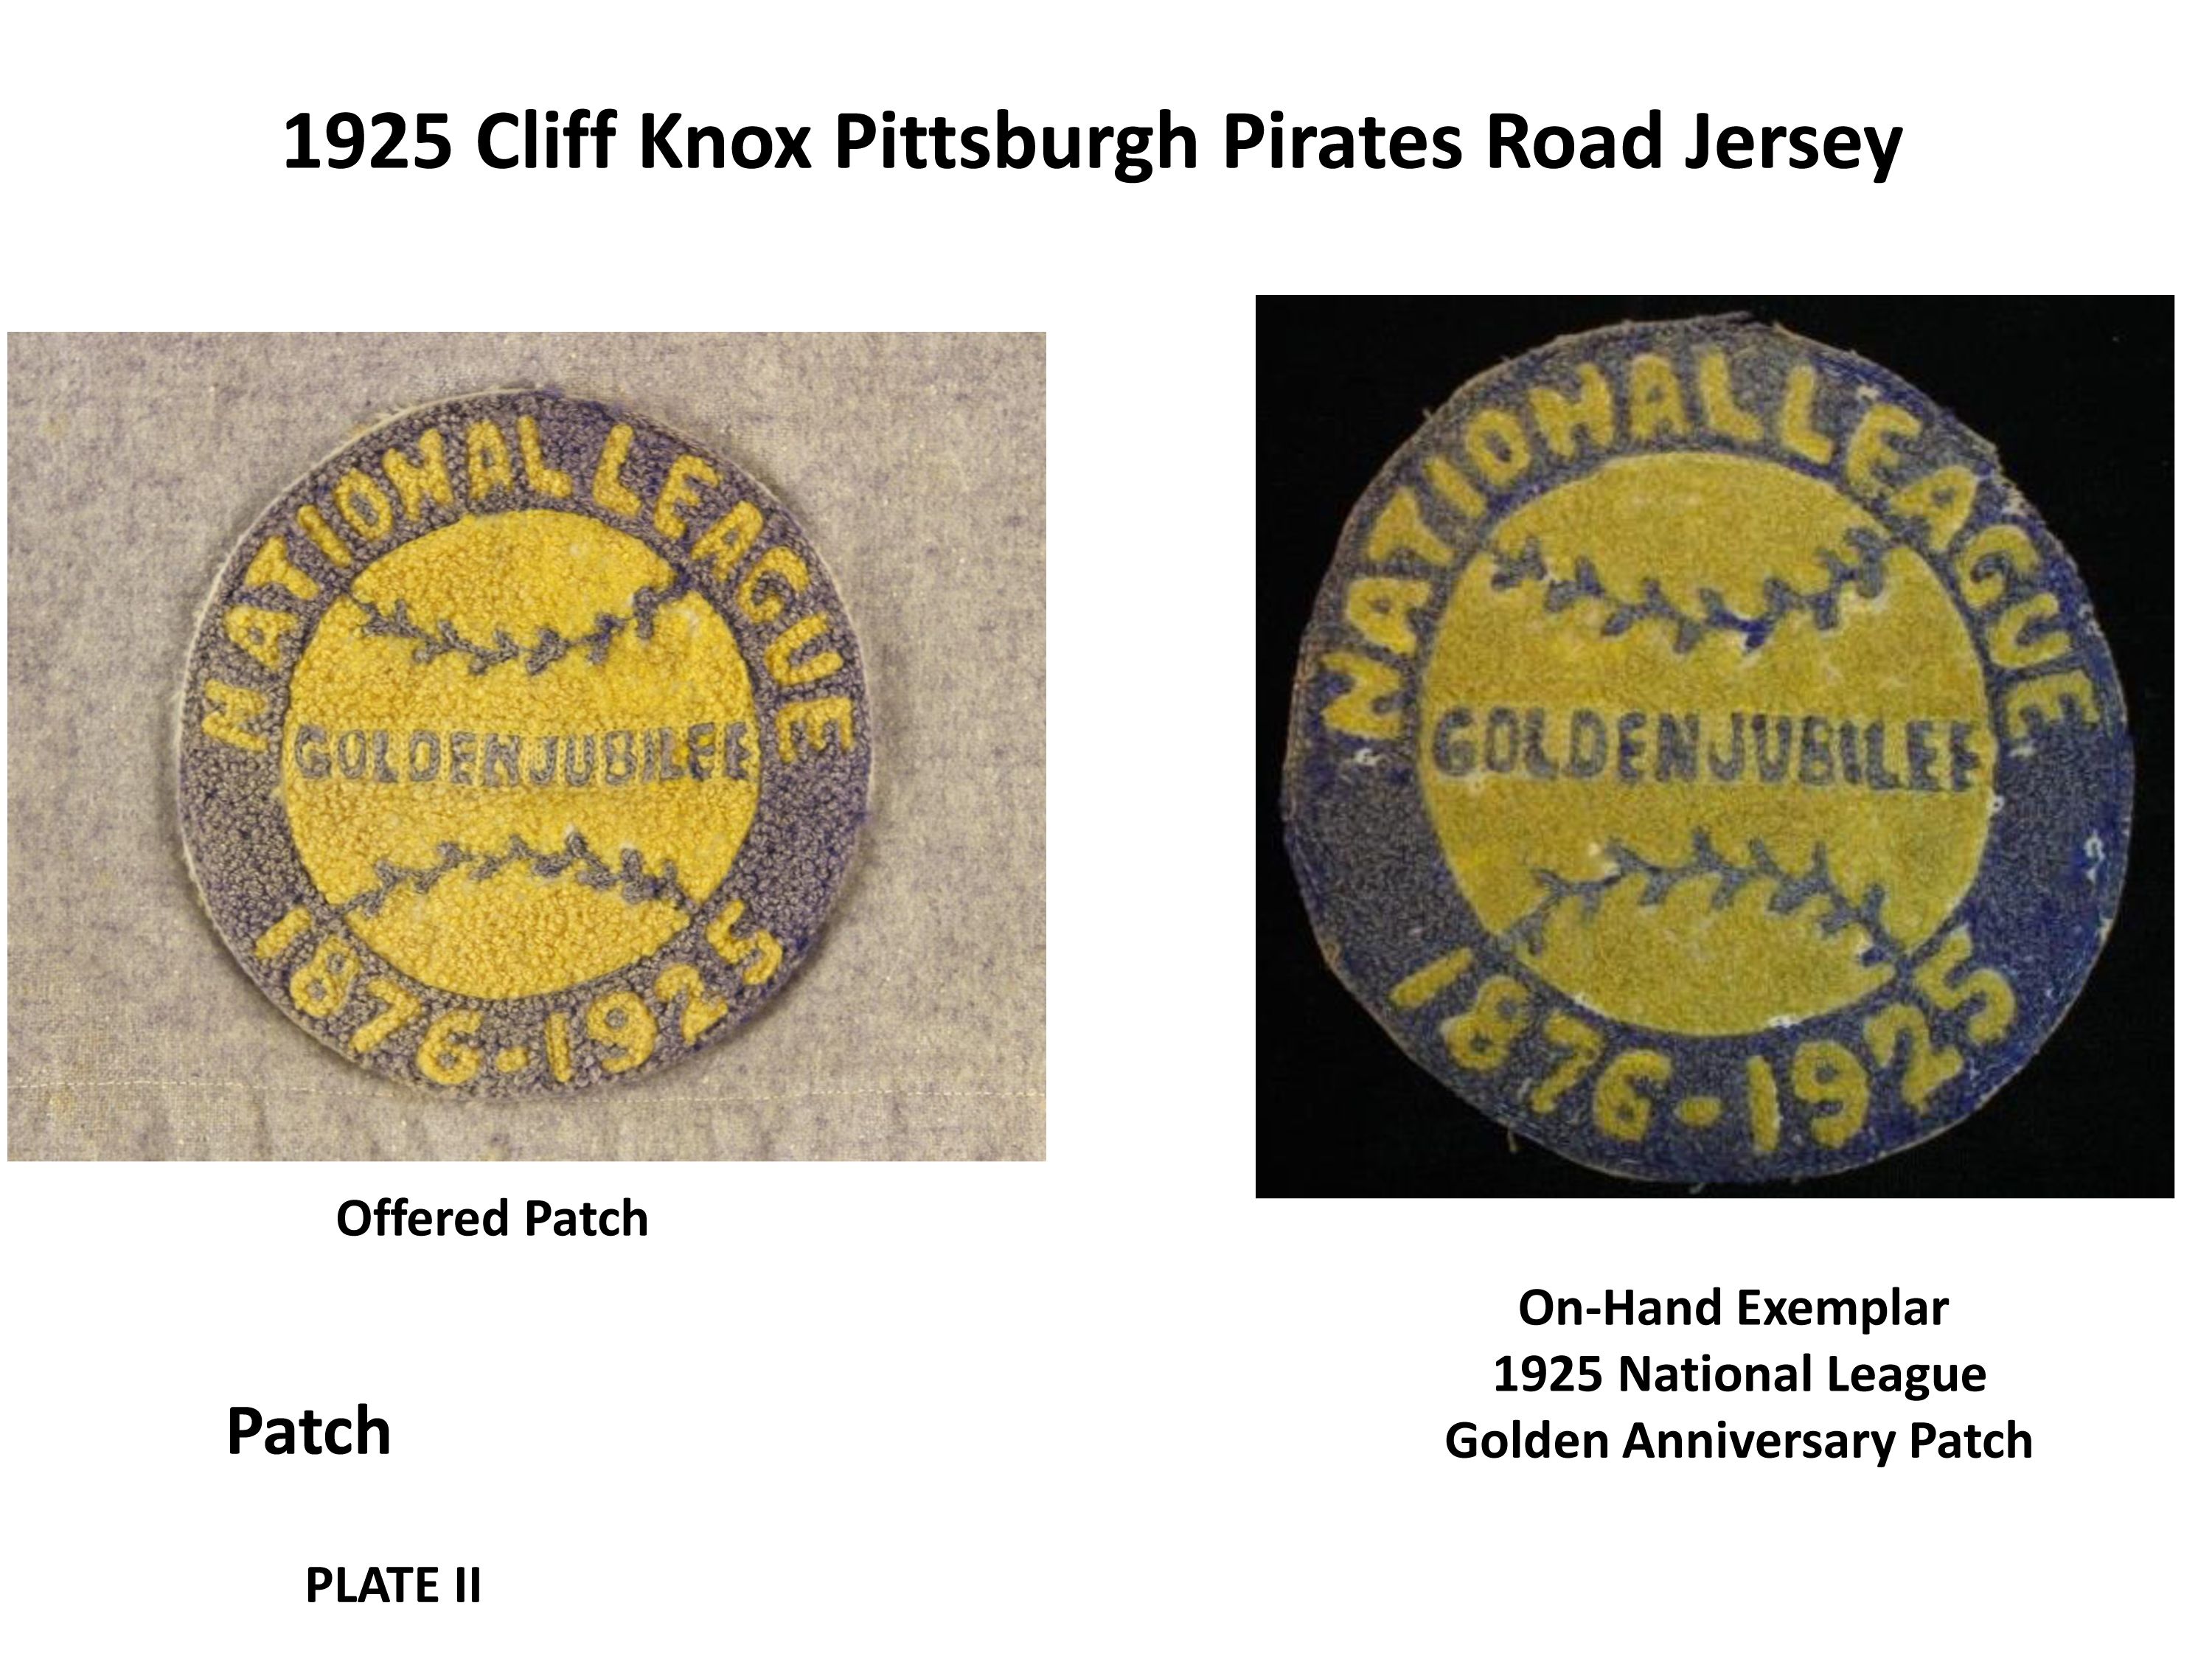 Commemorative 1925 Pittsburgh Pirates place mat - from Webster